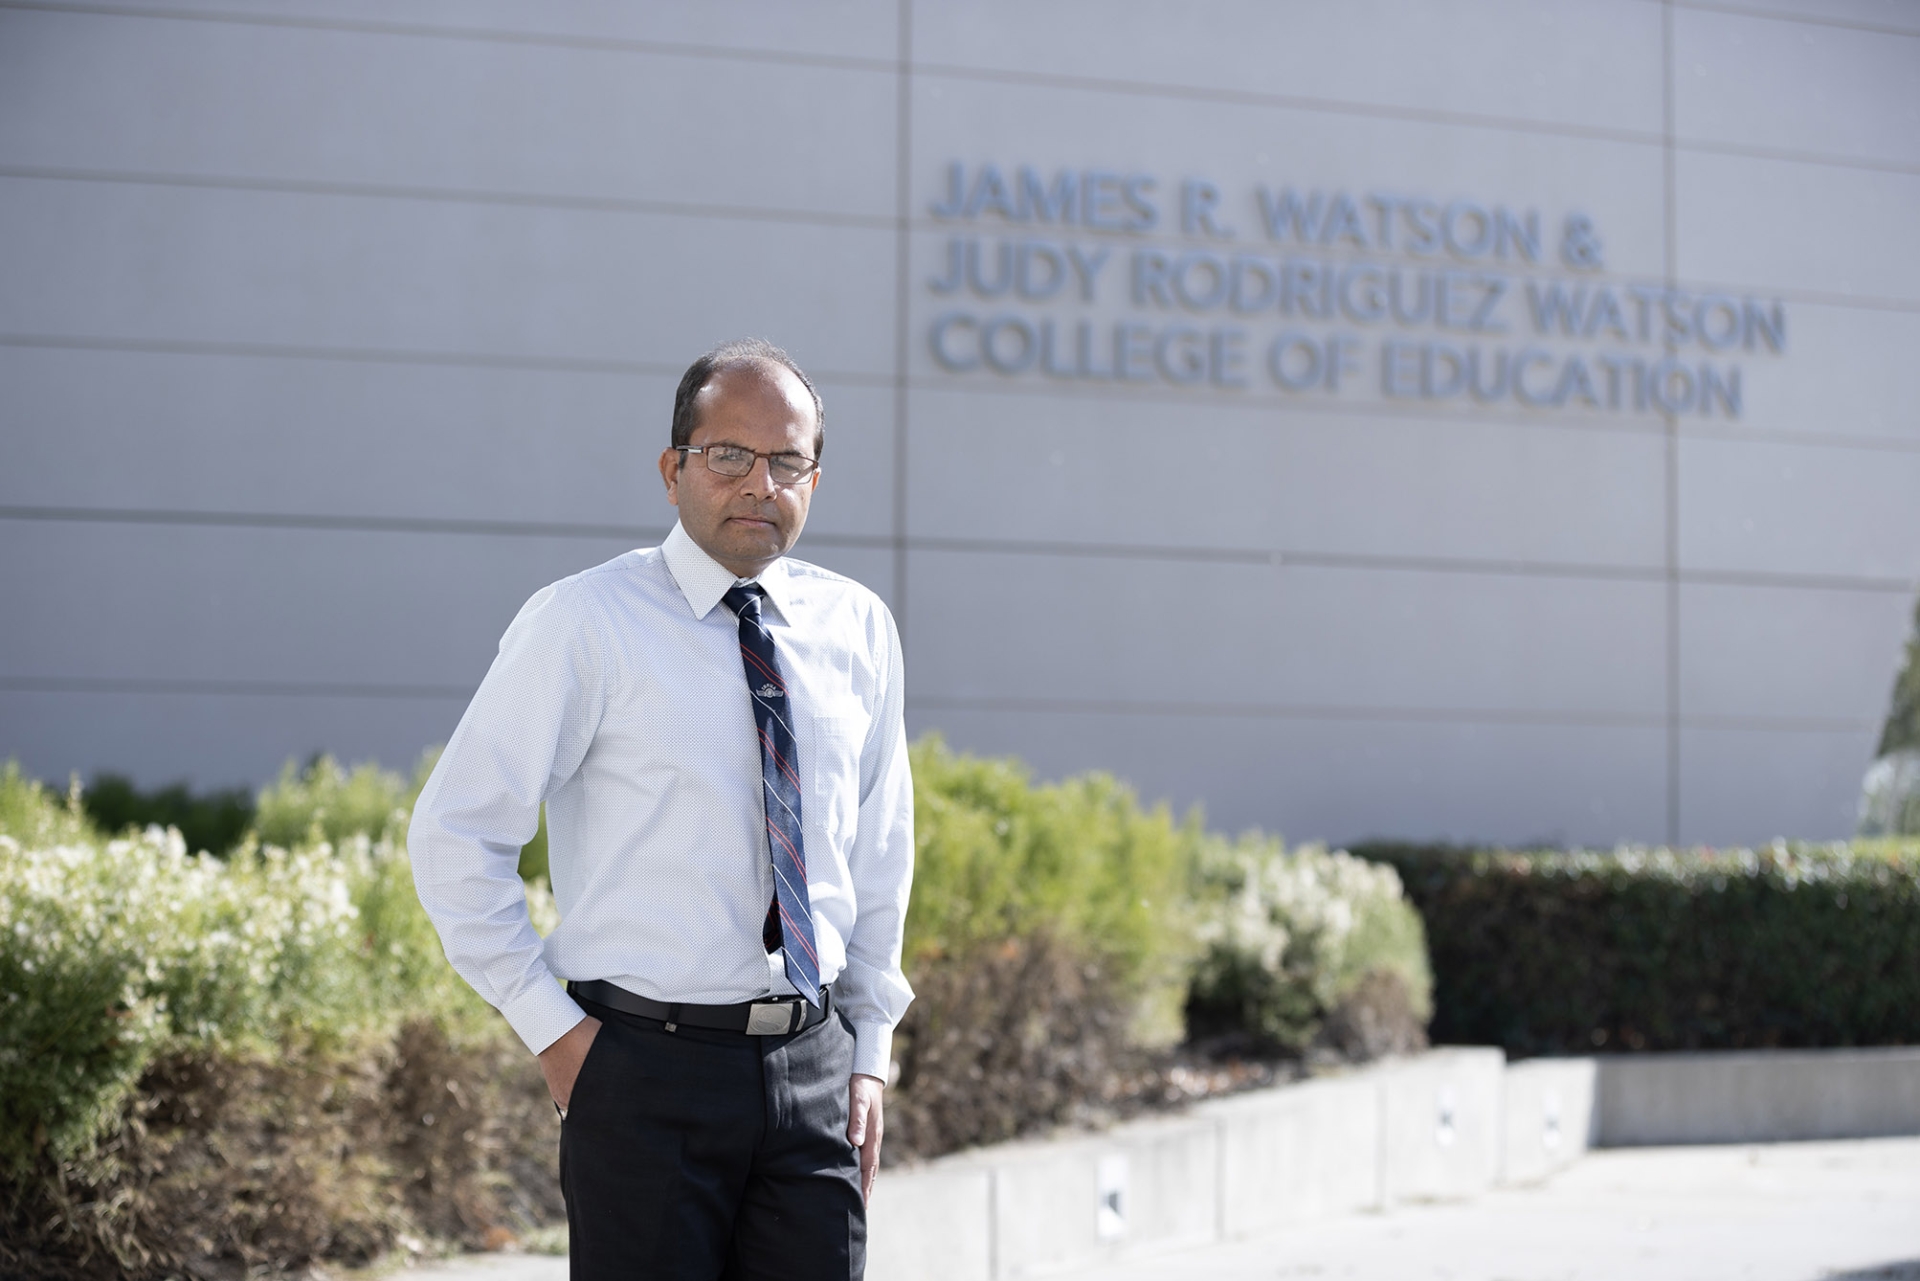 Abbas “Bobby” Quamar is an associate professor of special education, rehabilitation and counseling in CSUSB’s James R. Watson and Judy Rodriguez Watson College of Education.